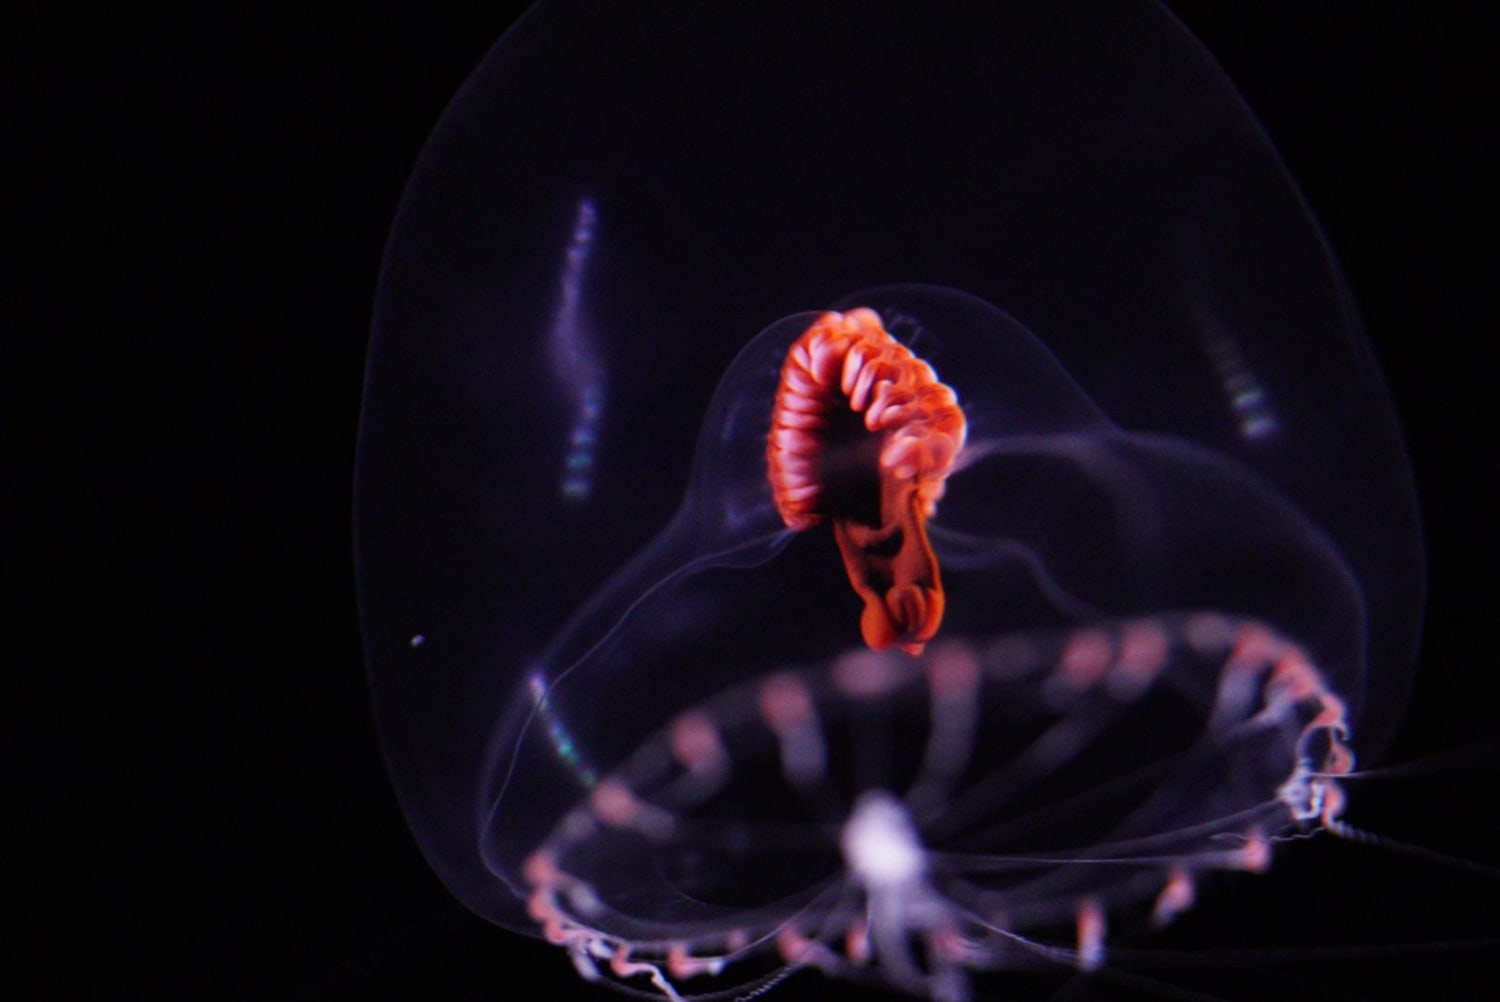 The Snow Globe Jelly (Modeeria Rotunda) has a Red Gut that helps it disguise the bioluminesce of its prey. This combined with its clear body make the animal look like a Brain floating in a Jar. These are currently on display at the Monterey Bay Aquarium apart of the new "Into the Deep" Exhibit.